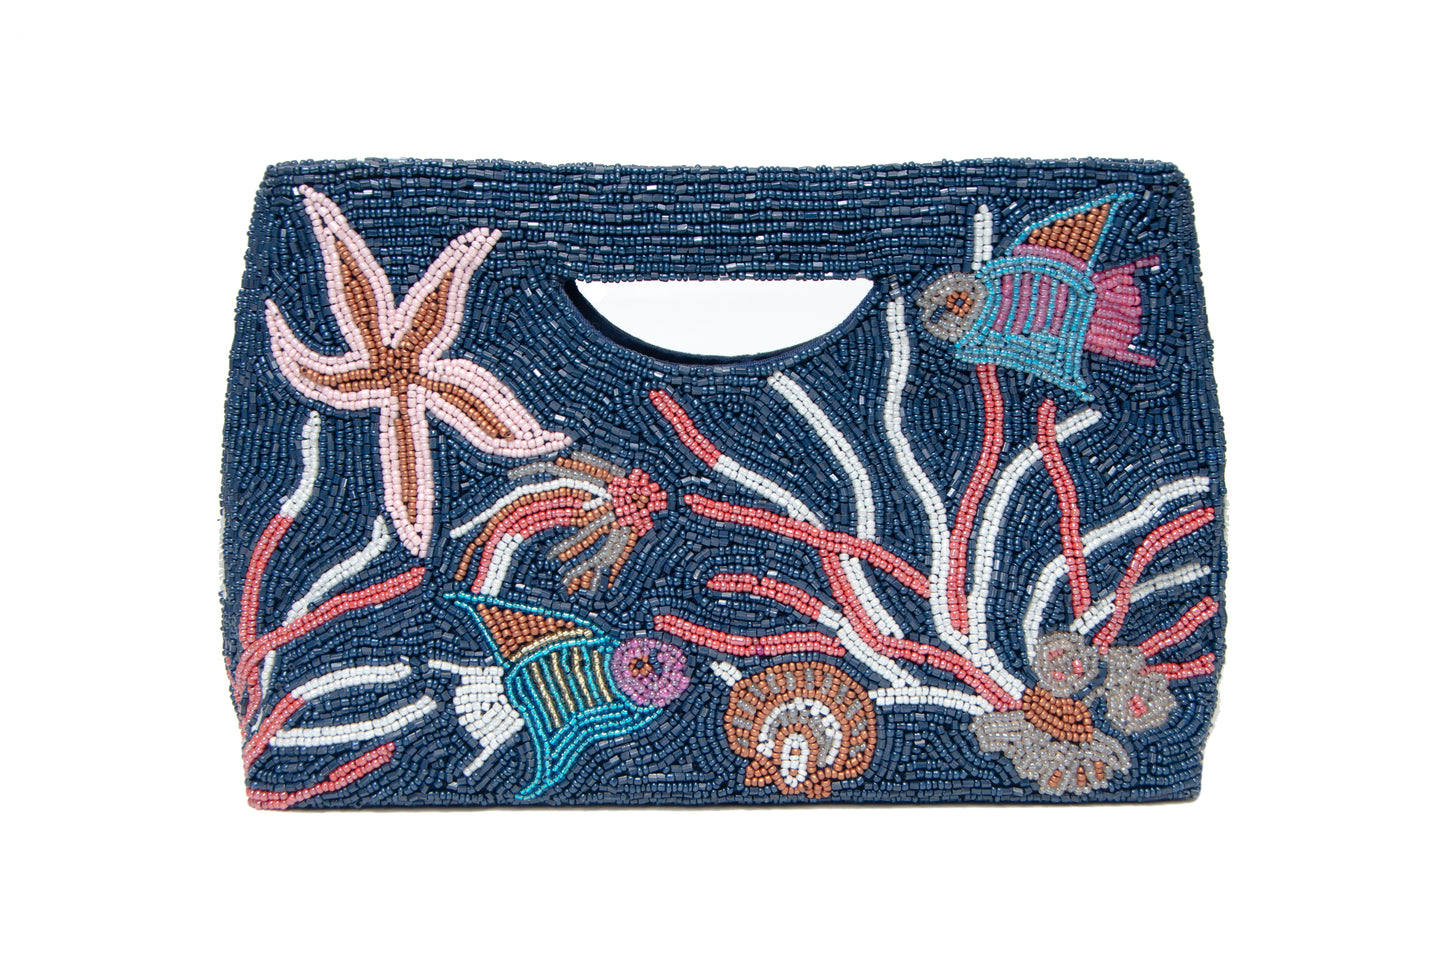 Tiana Designs Cut Out Handle Clutch Navy/White/Op Coral available at The Good Life Boutique